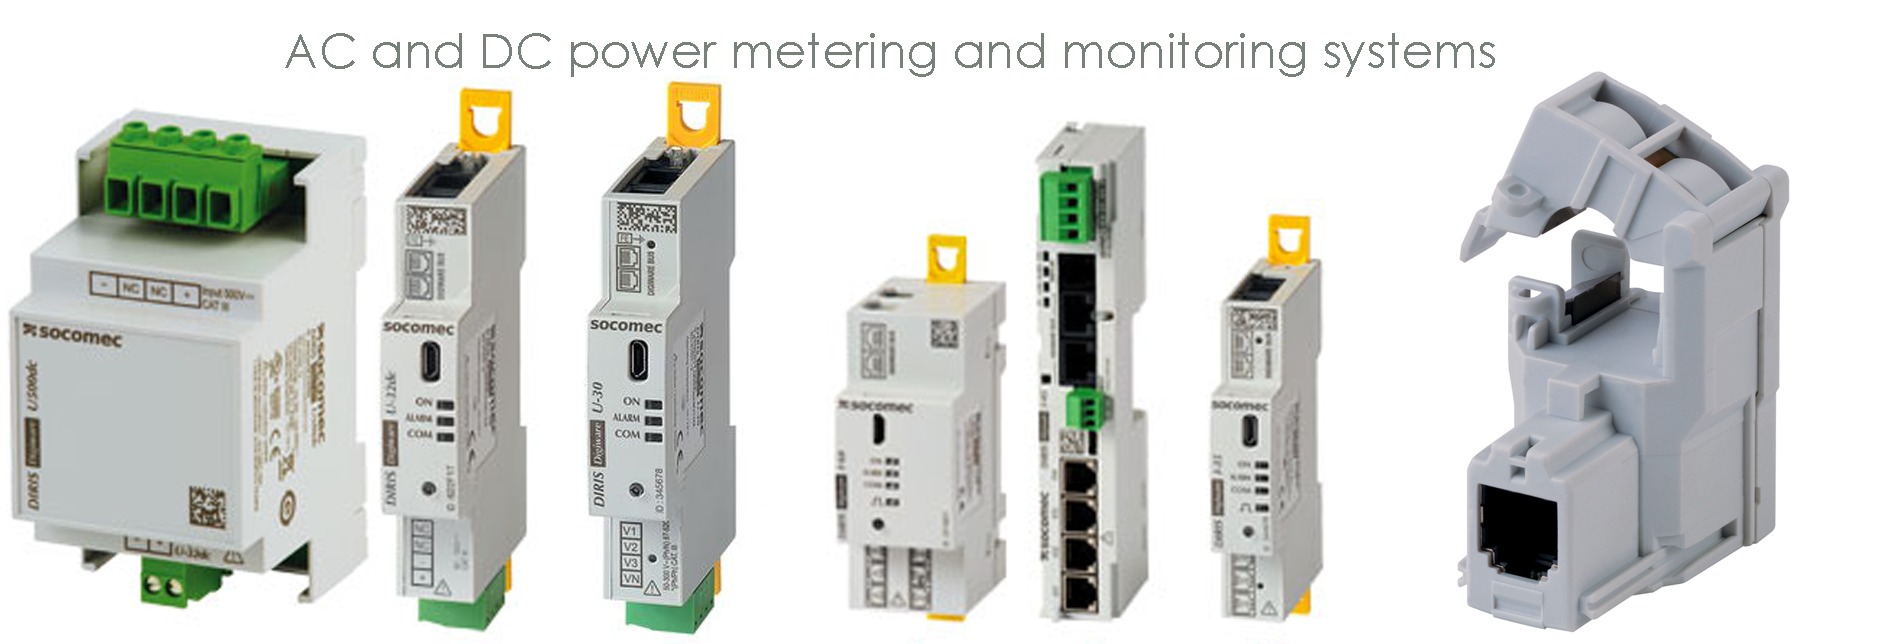 AC and DC power metering and monitoring 